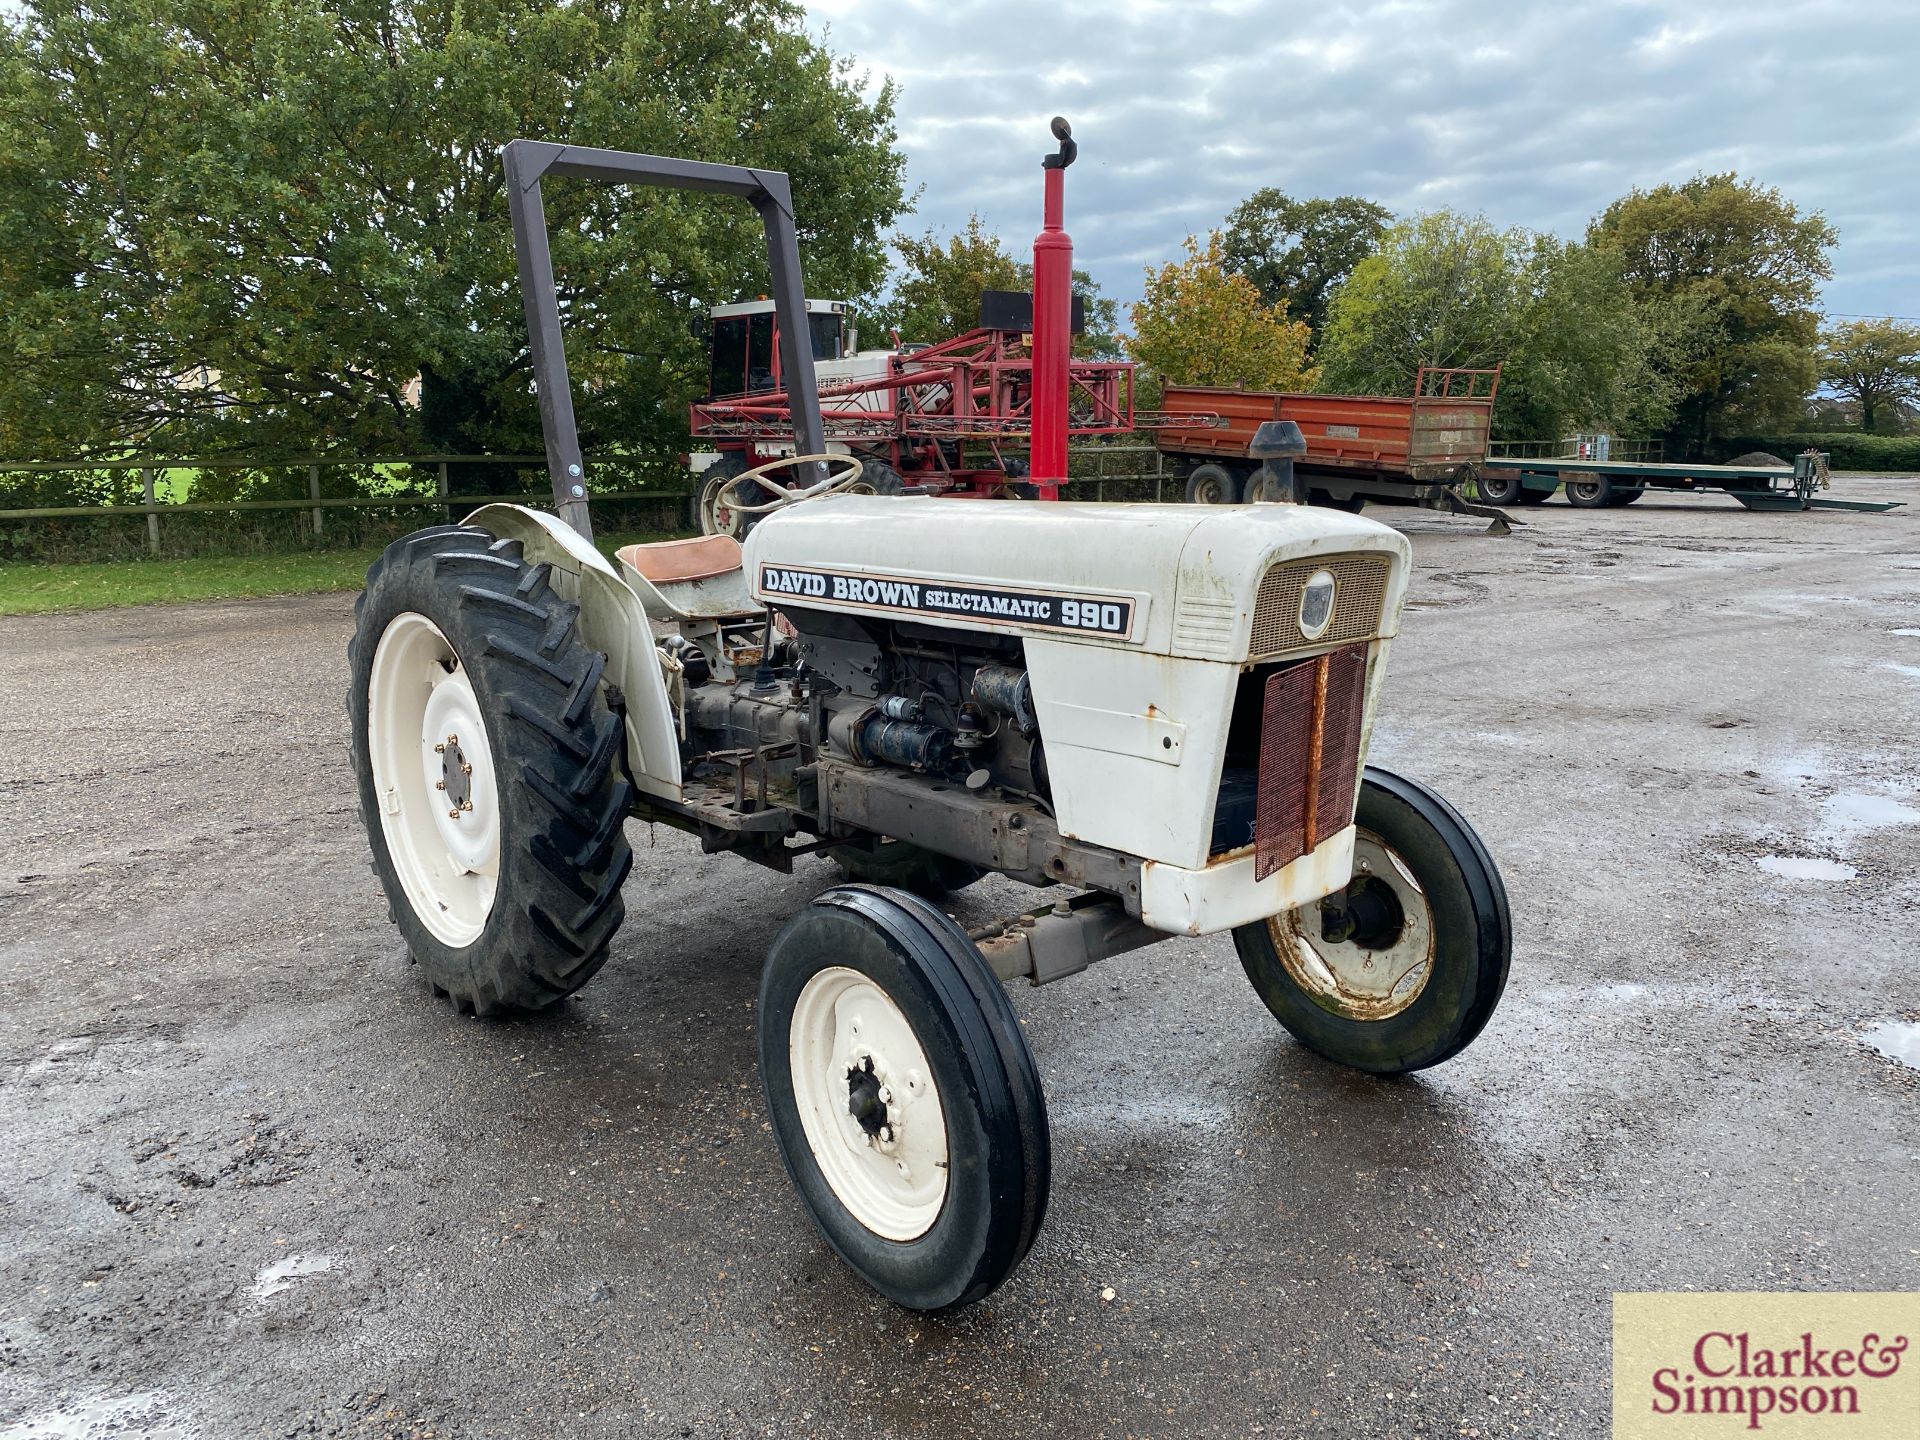 David Brown 990 Selectamatic 2WD tractor. Registration DUE 781D (no paperwork). Serial number 990A/